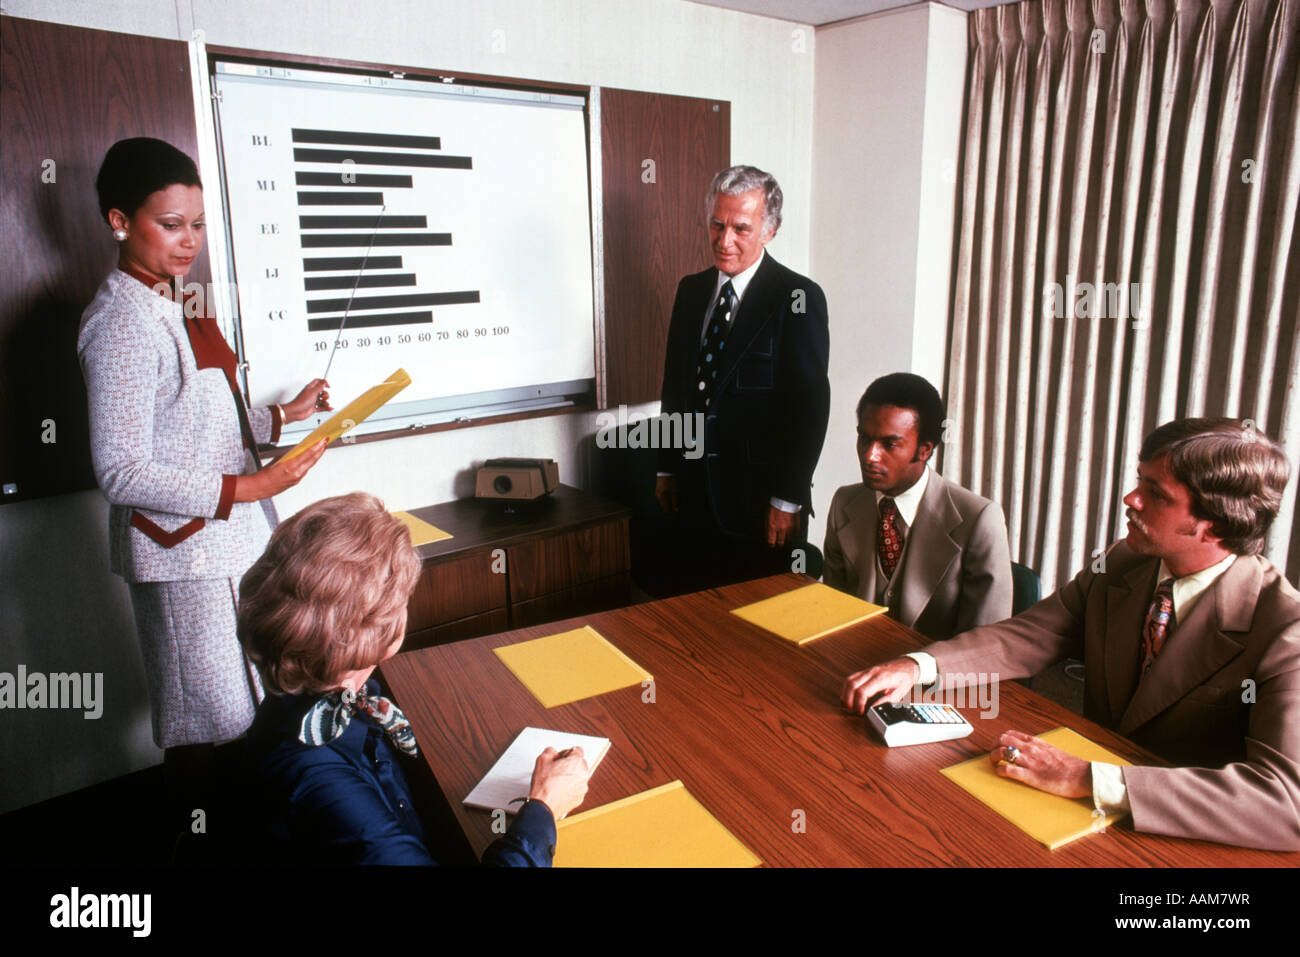 1970 1970s 6 PEOPLE GROUP BUSINESS BOARD MEETING CHART VISUAL AID CONFERENCE BUSINESSMAN BUSINESSWOMAN MEN WOMEN Stock Photo